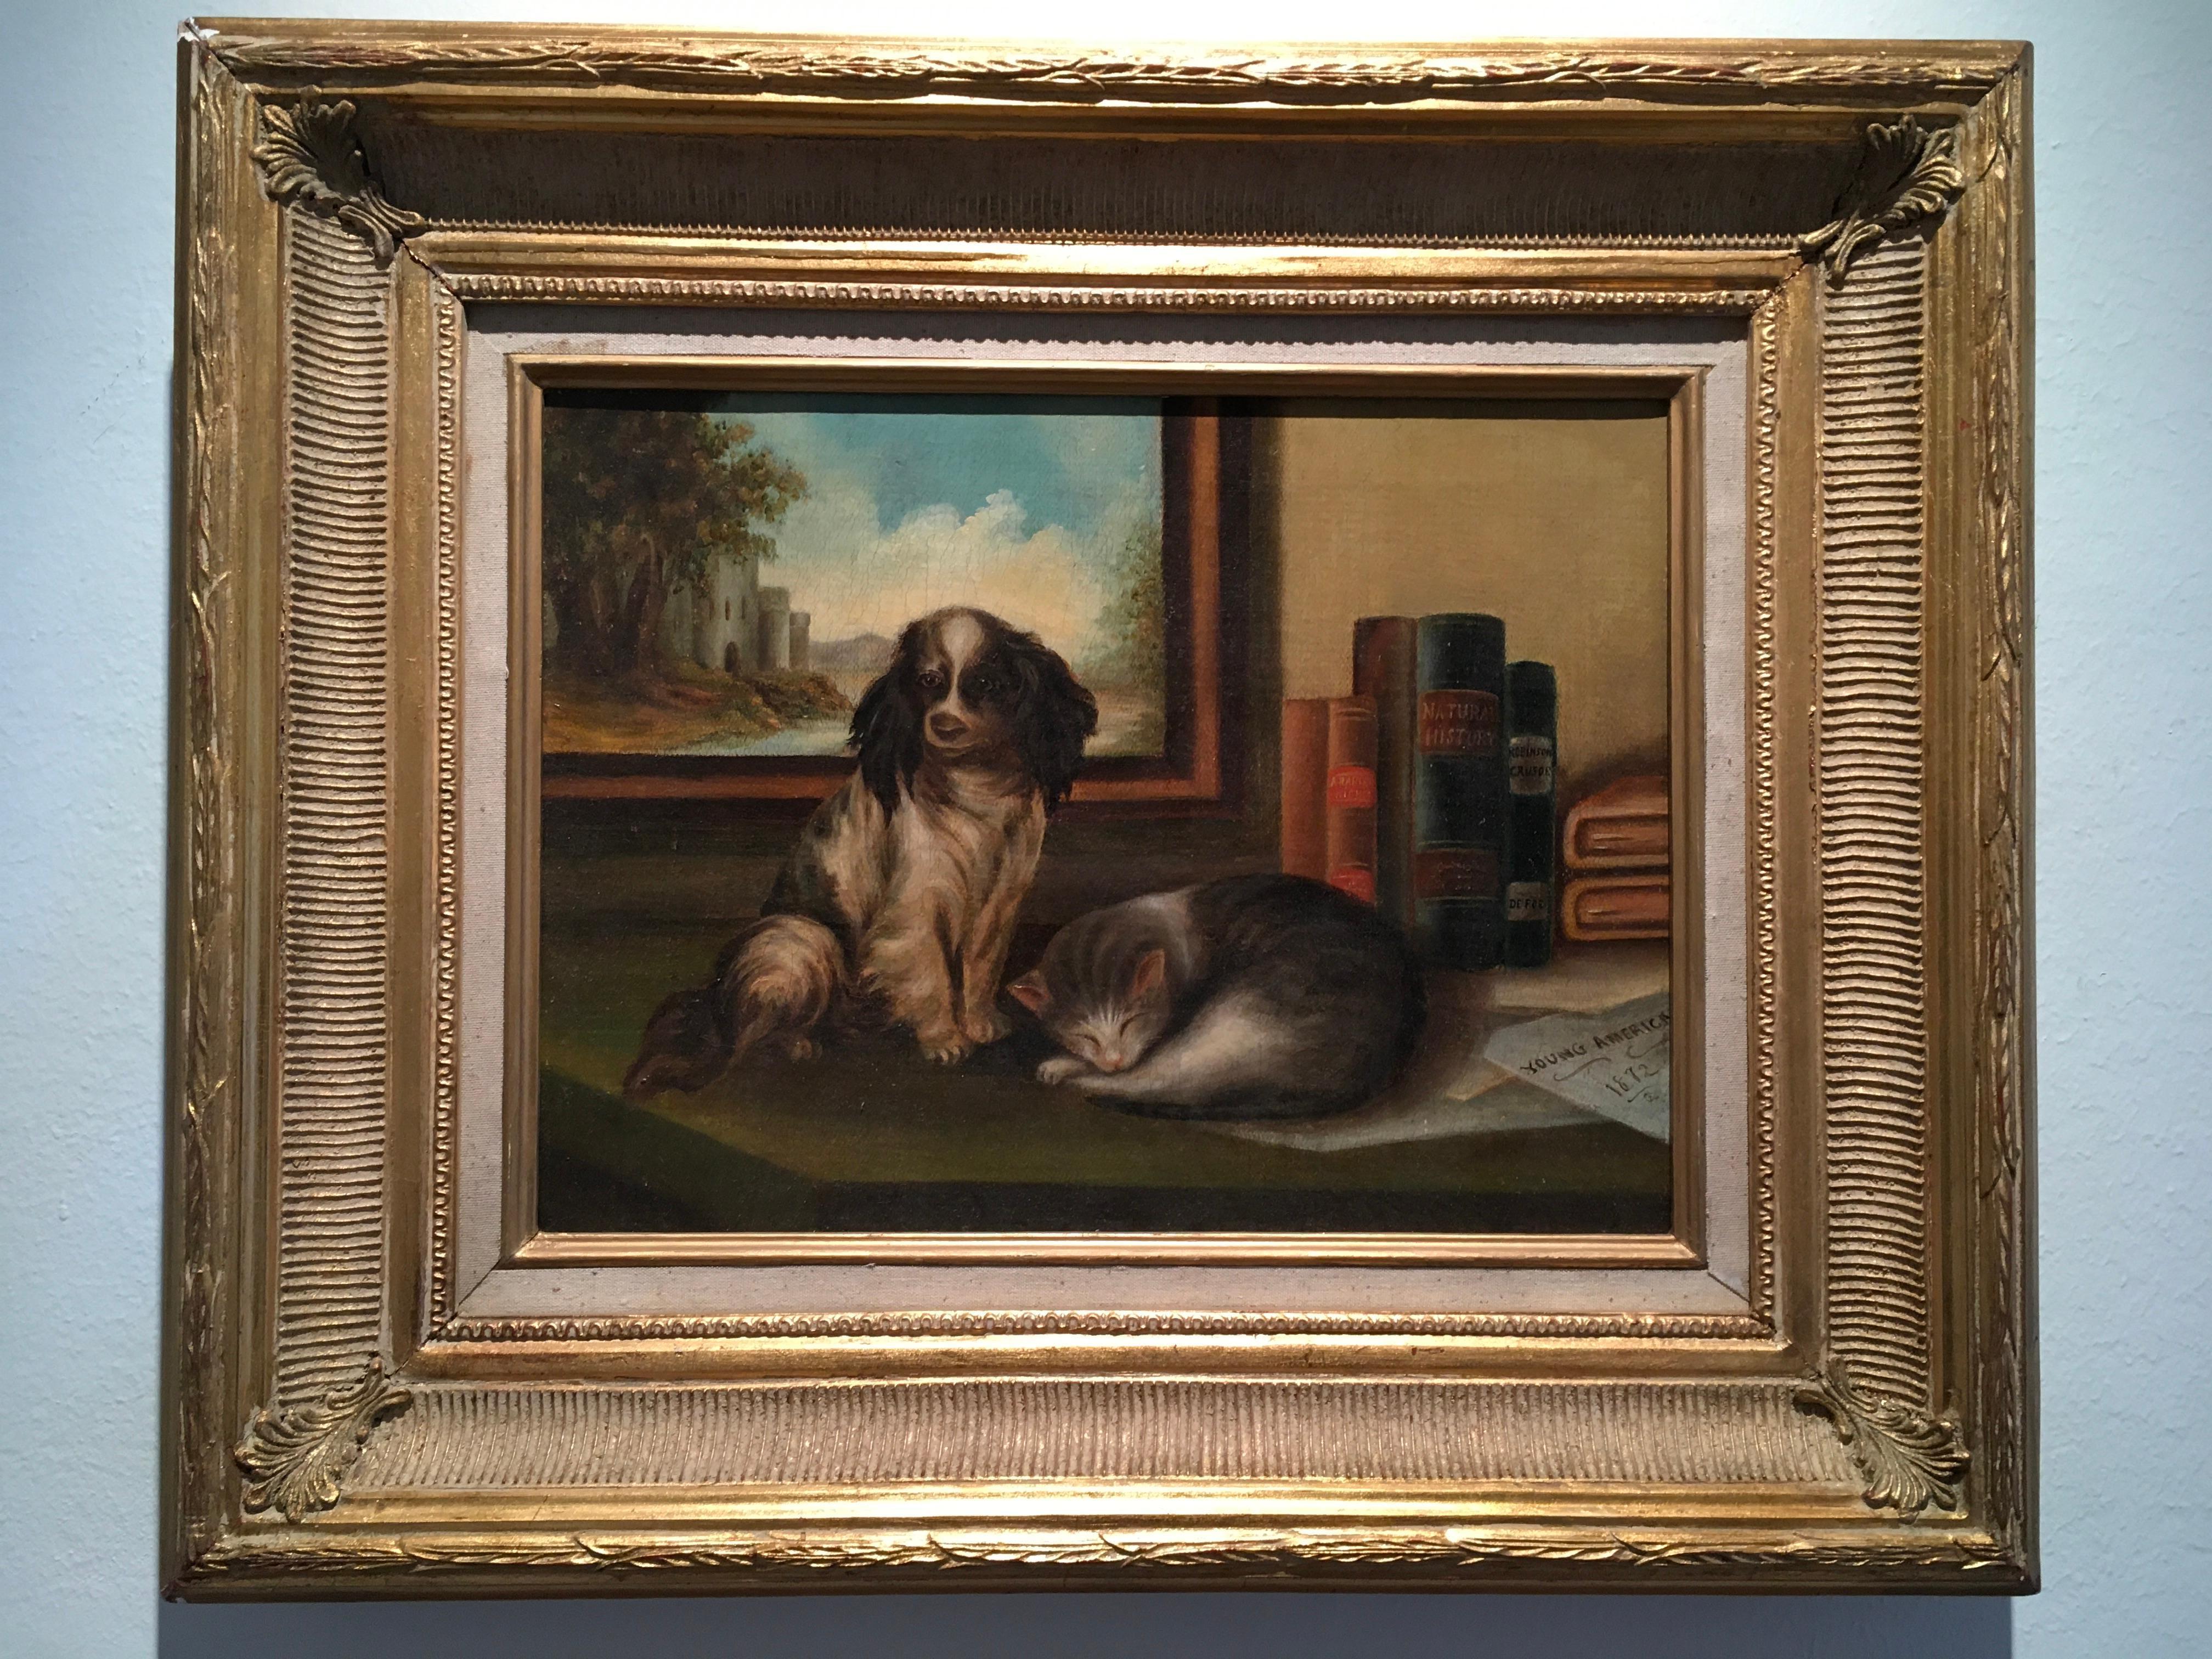 This classic English school 12 x 16 in. Oil on Canvas framed painting features a pet Spaniel and cat resting on a desk in a home study environment. The dog is seated, its body facing the right side of the painting while its head is facing the viewer